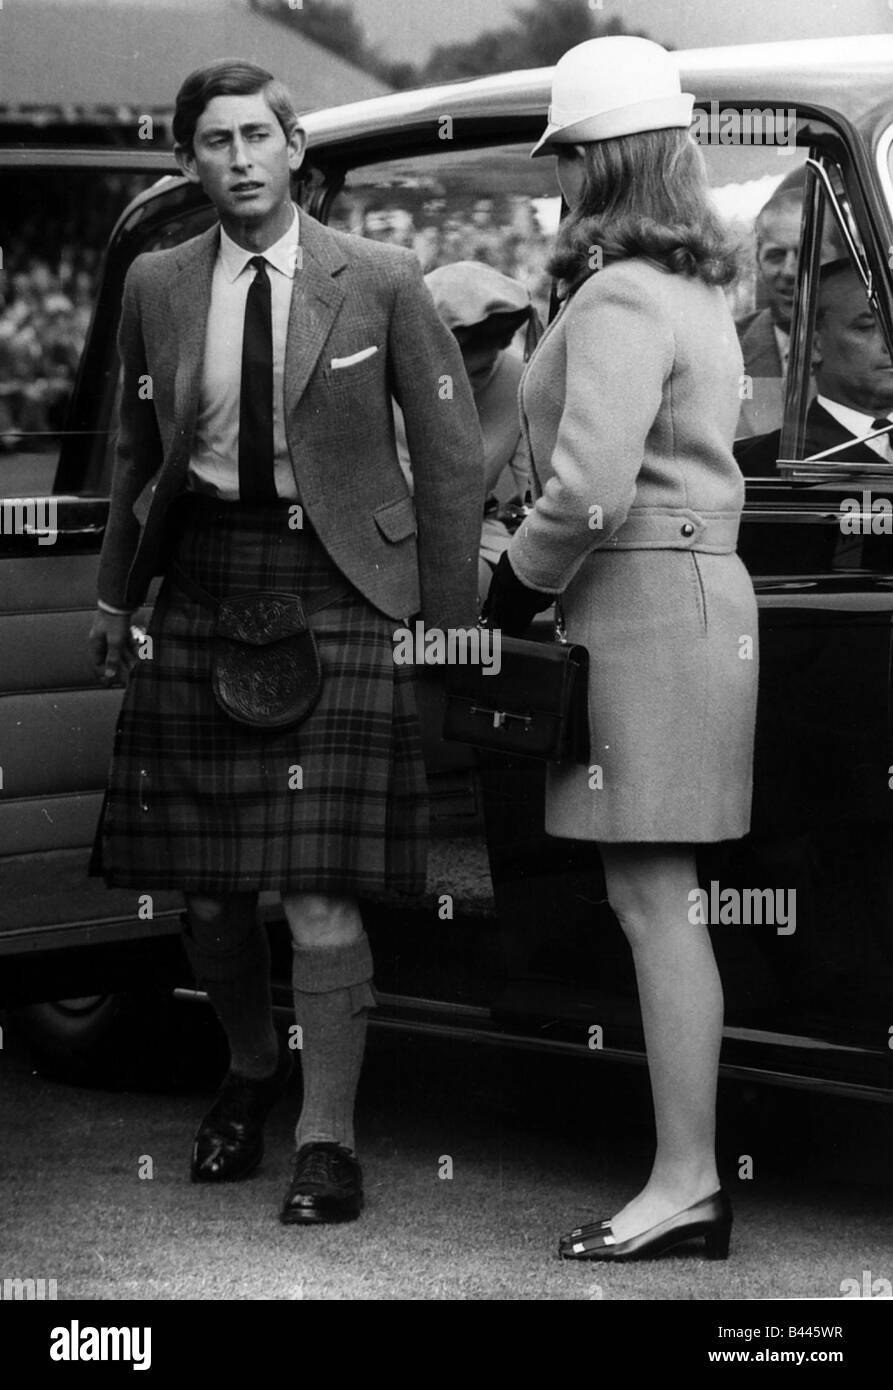 Woman in kilt Black and White Stock Photos & Images - Alamy